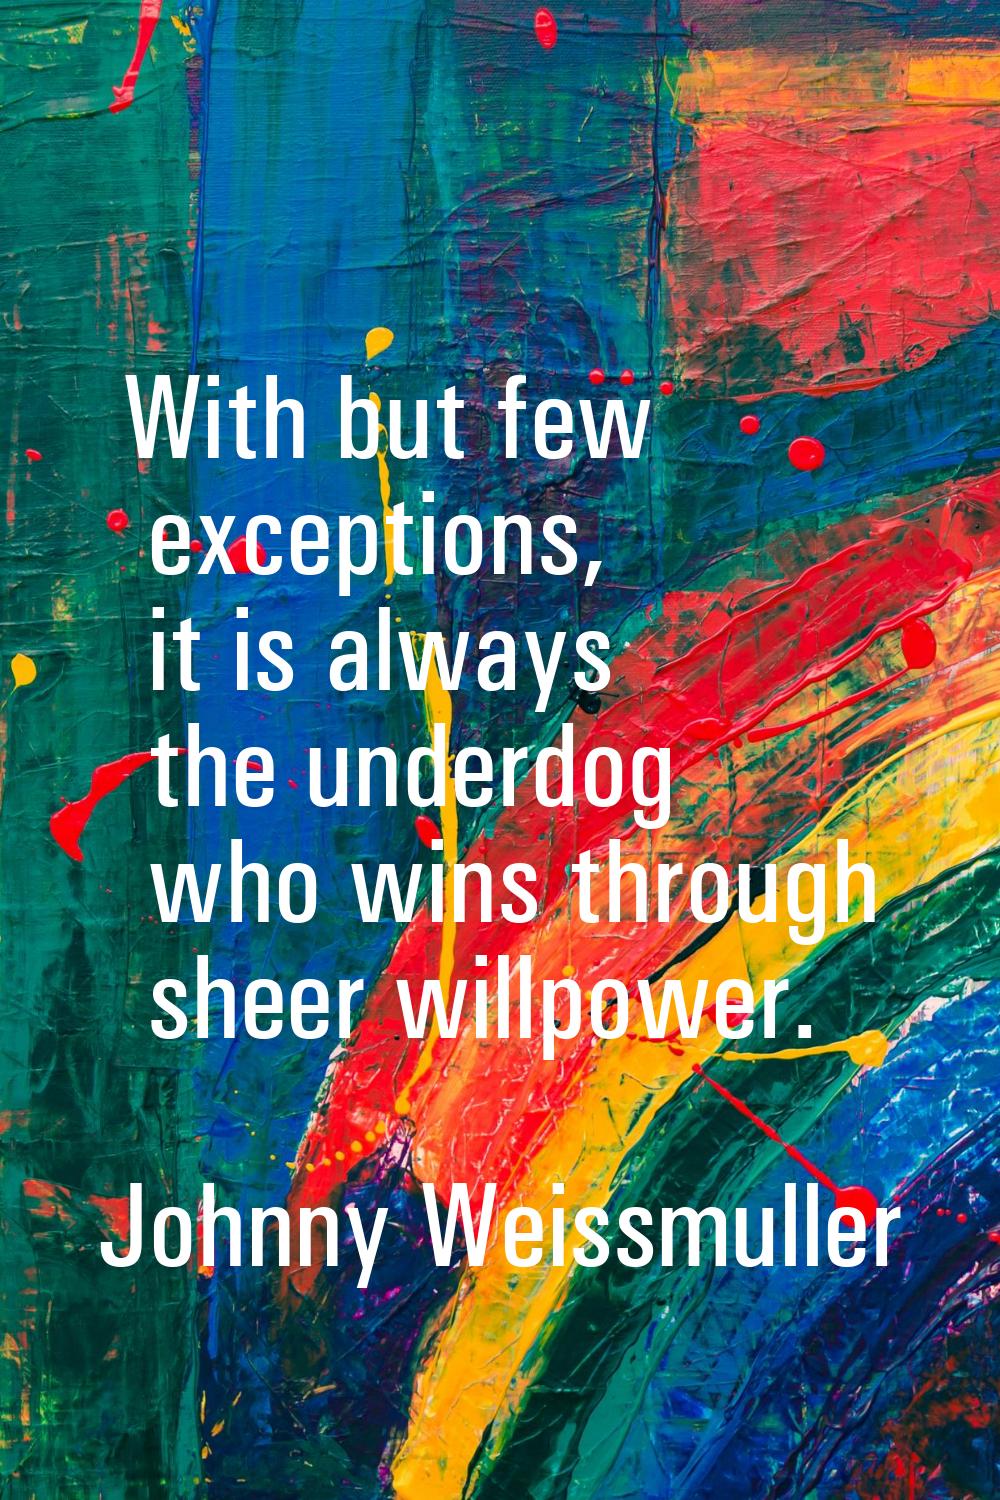 With but few exceptions, it is always the underdog who wins through sheer willpower.